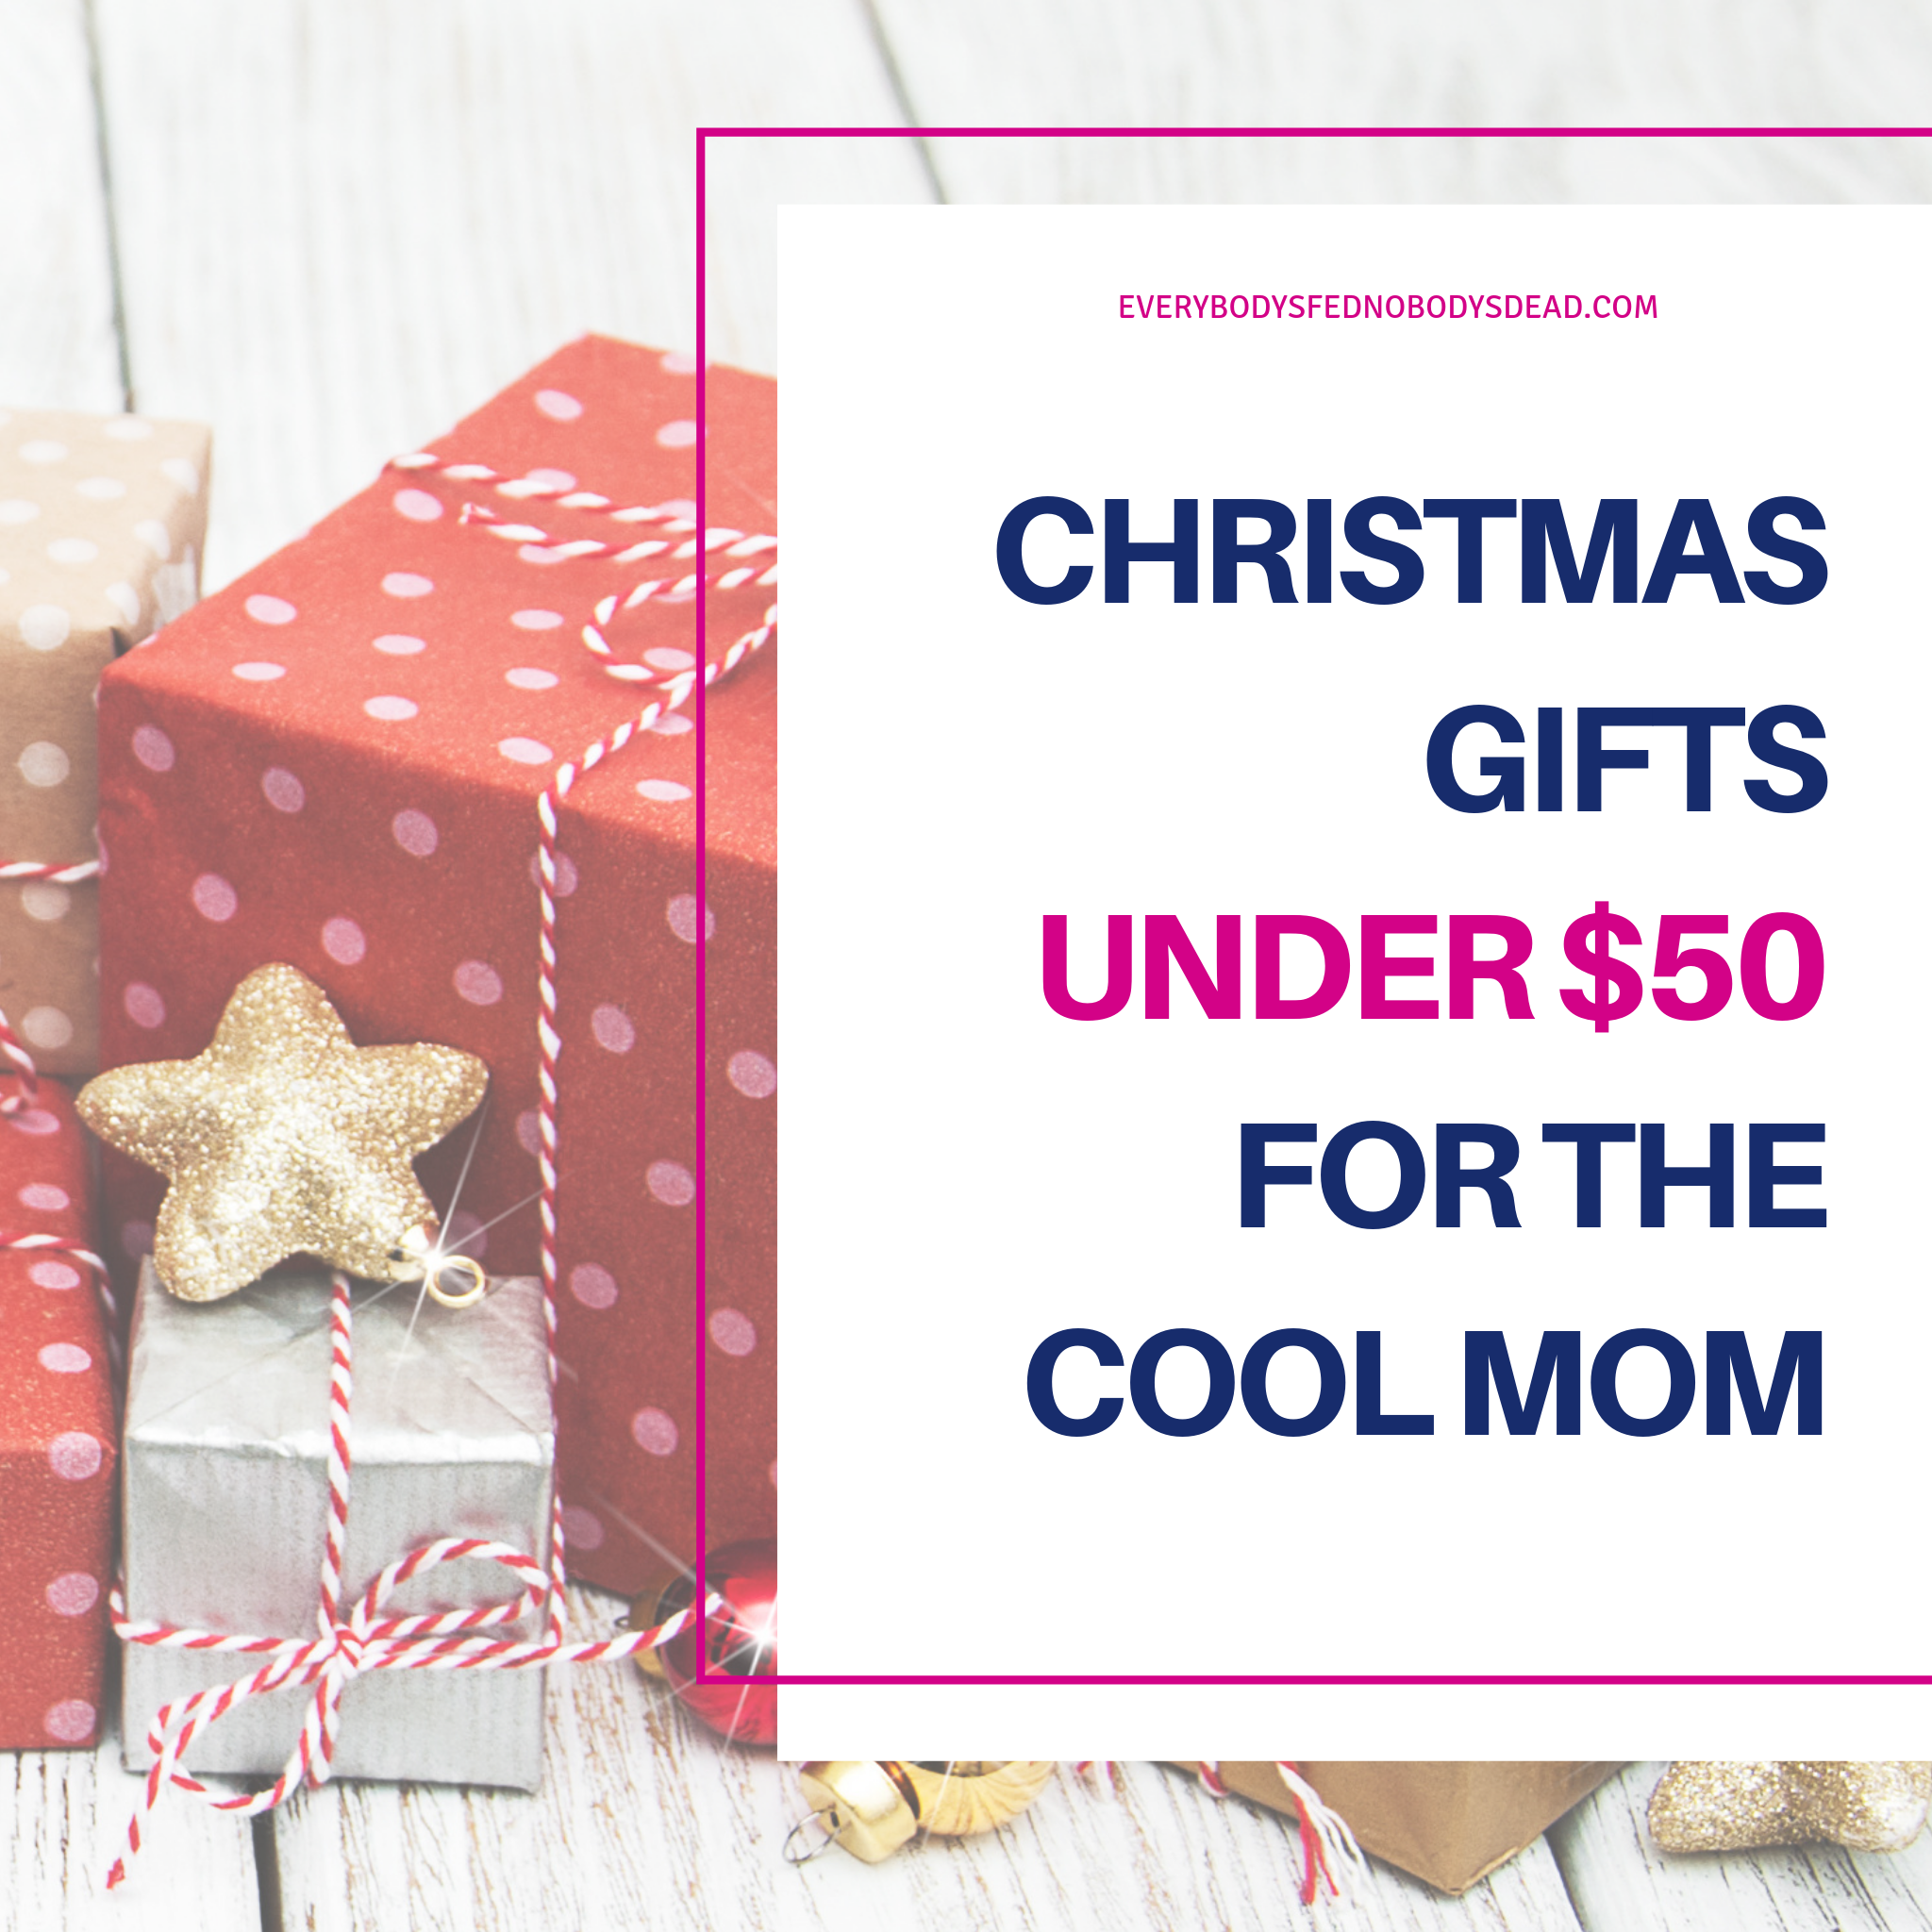 Christmas Gifts Under $50 for the Cool Mom